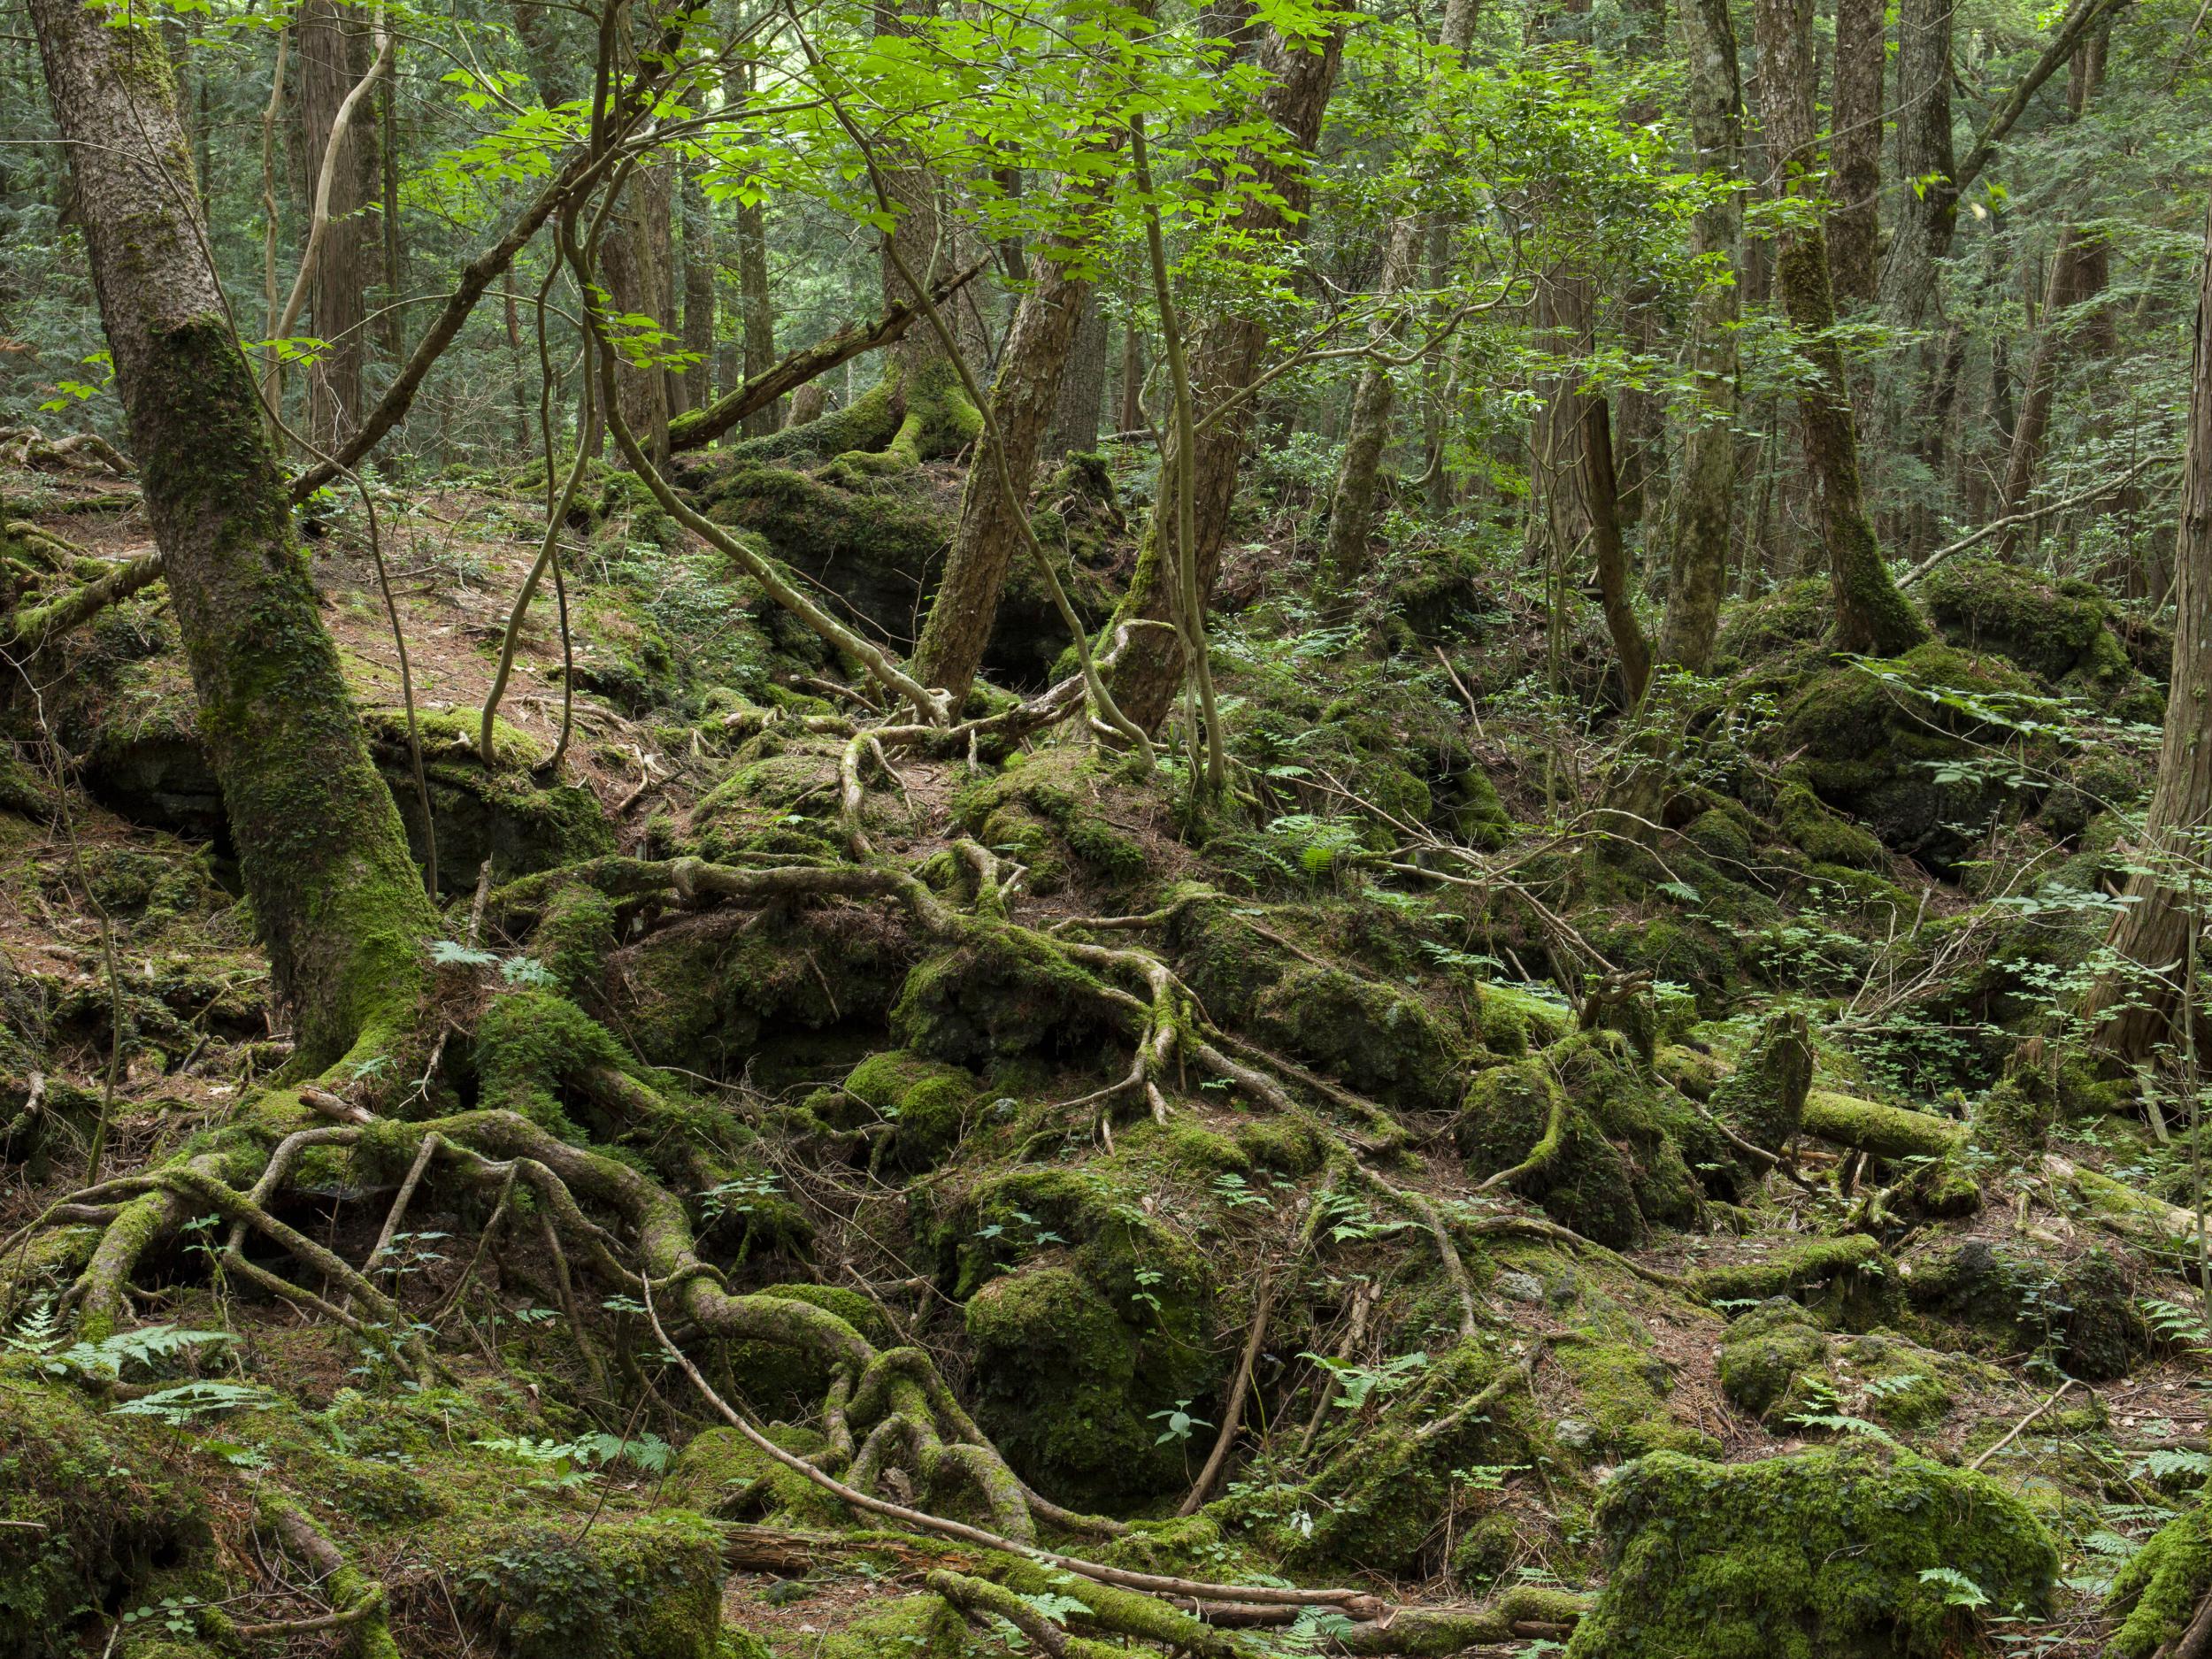 Depictions of Aokigahara Forest in popular culture have romanticised suicide and hinder prevention efforts